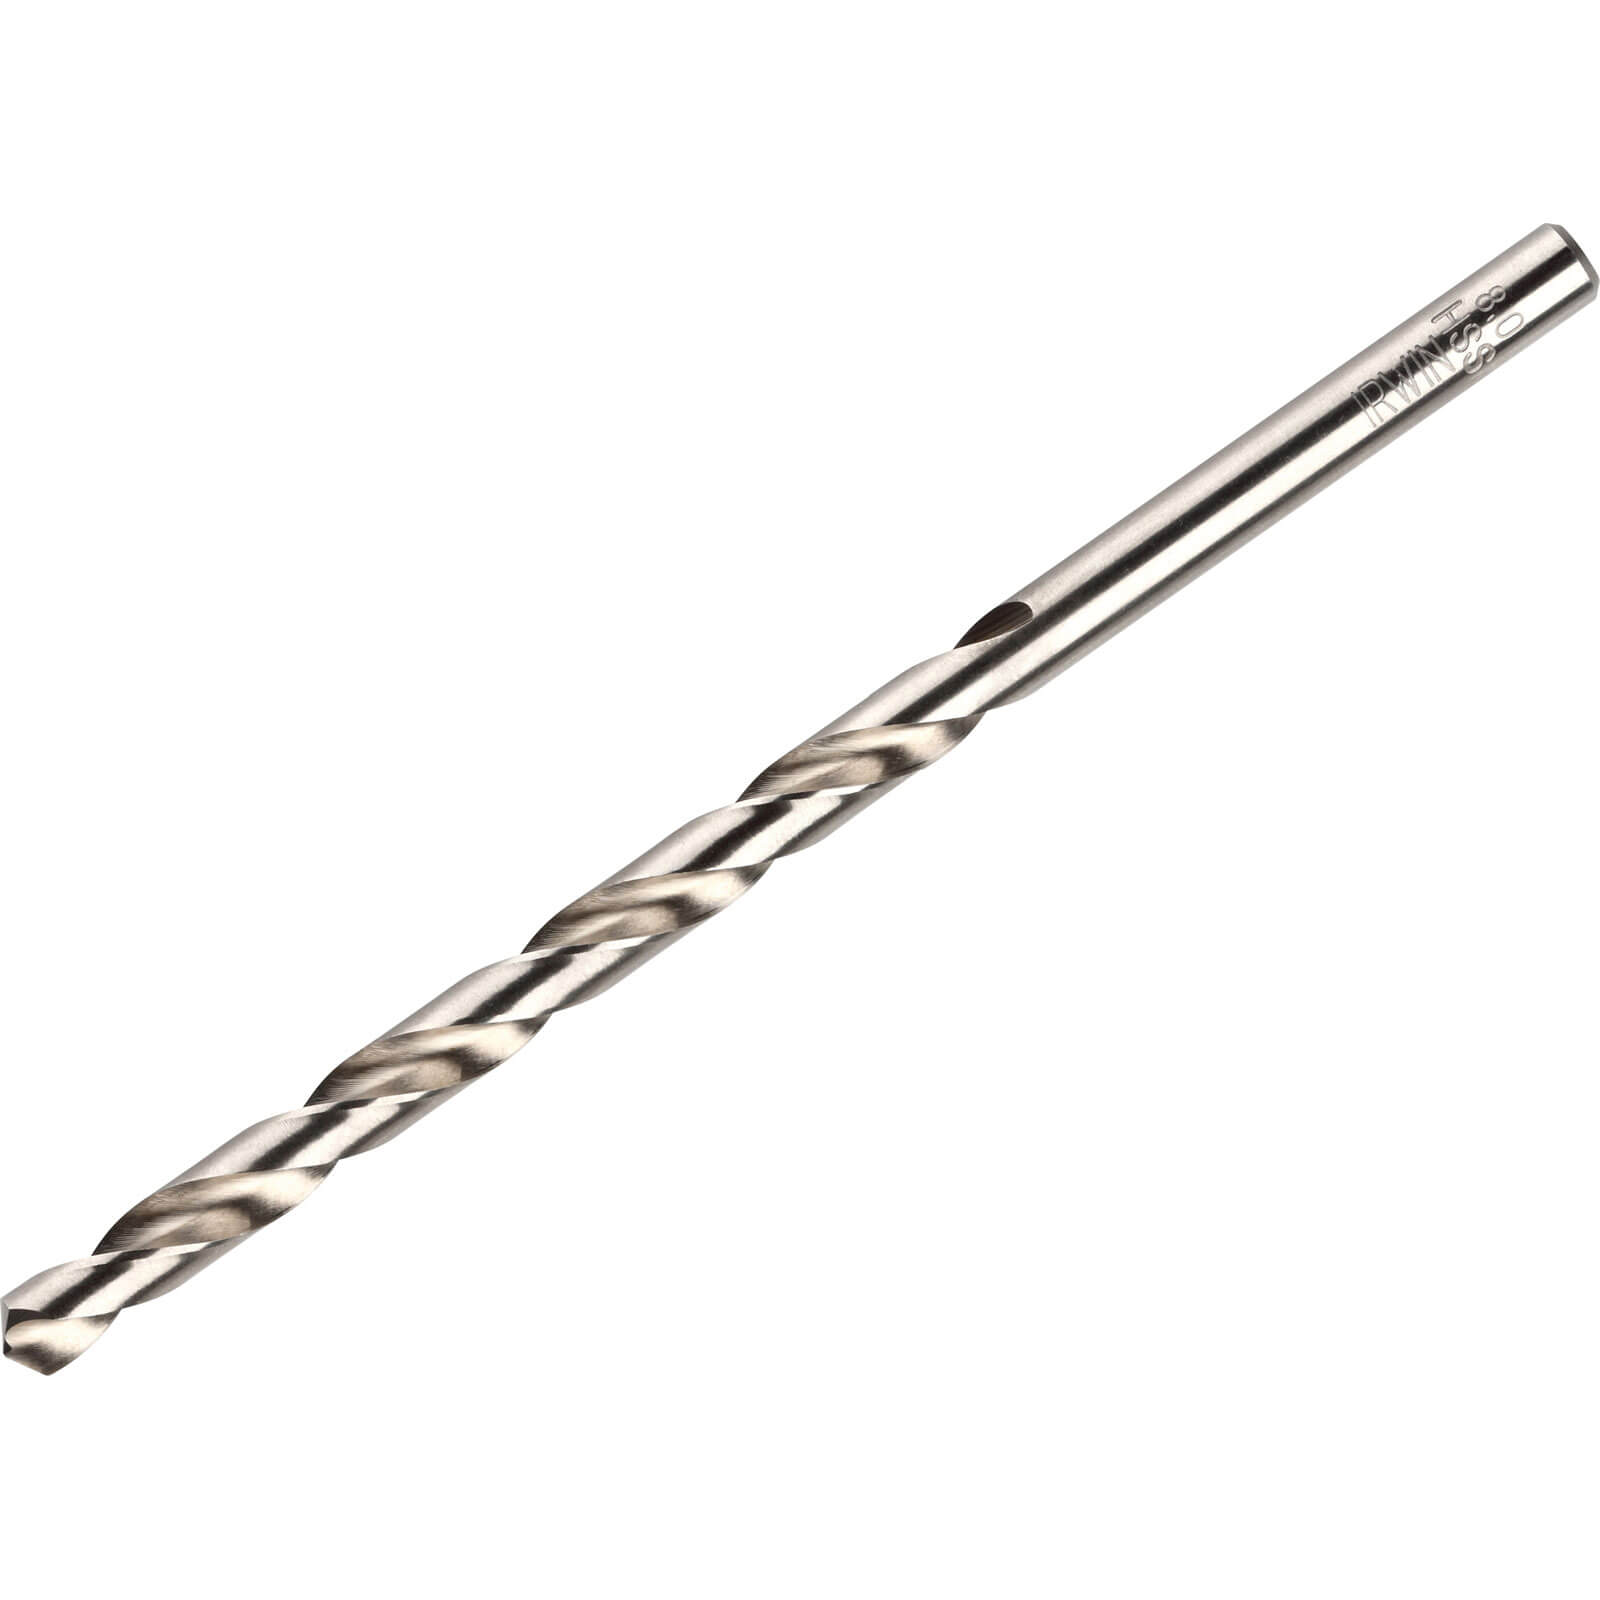 Photo of Irwin Hss Pro Drill Bits 5mm Pack Of 10